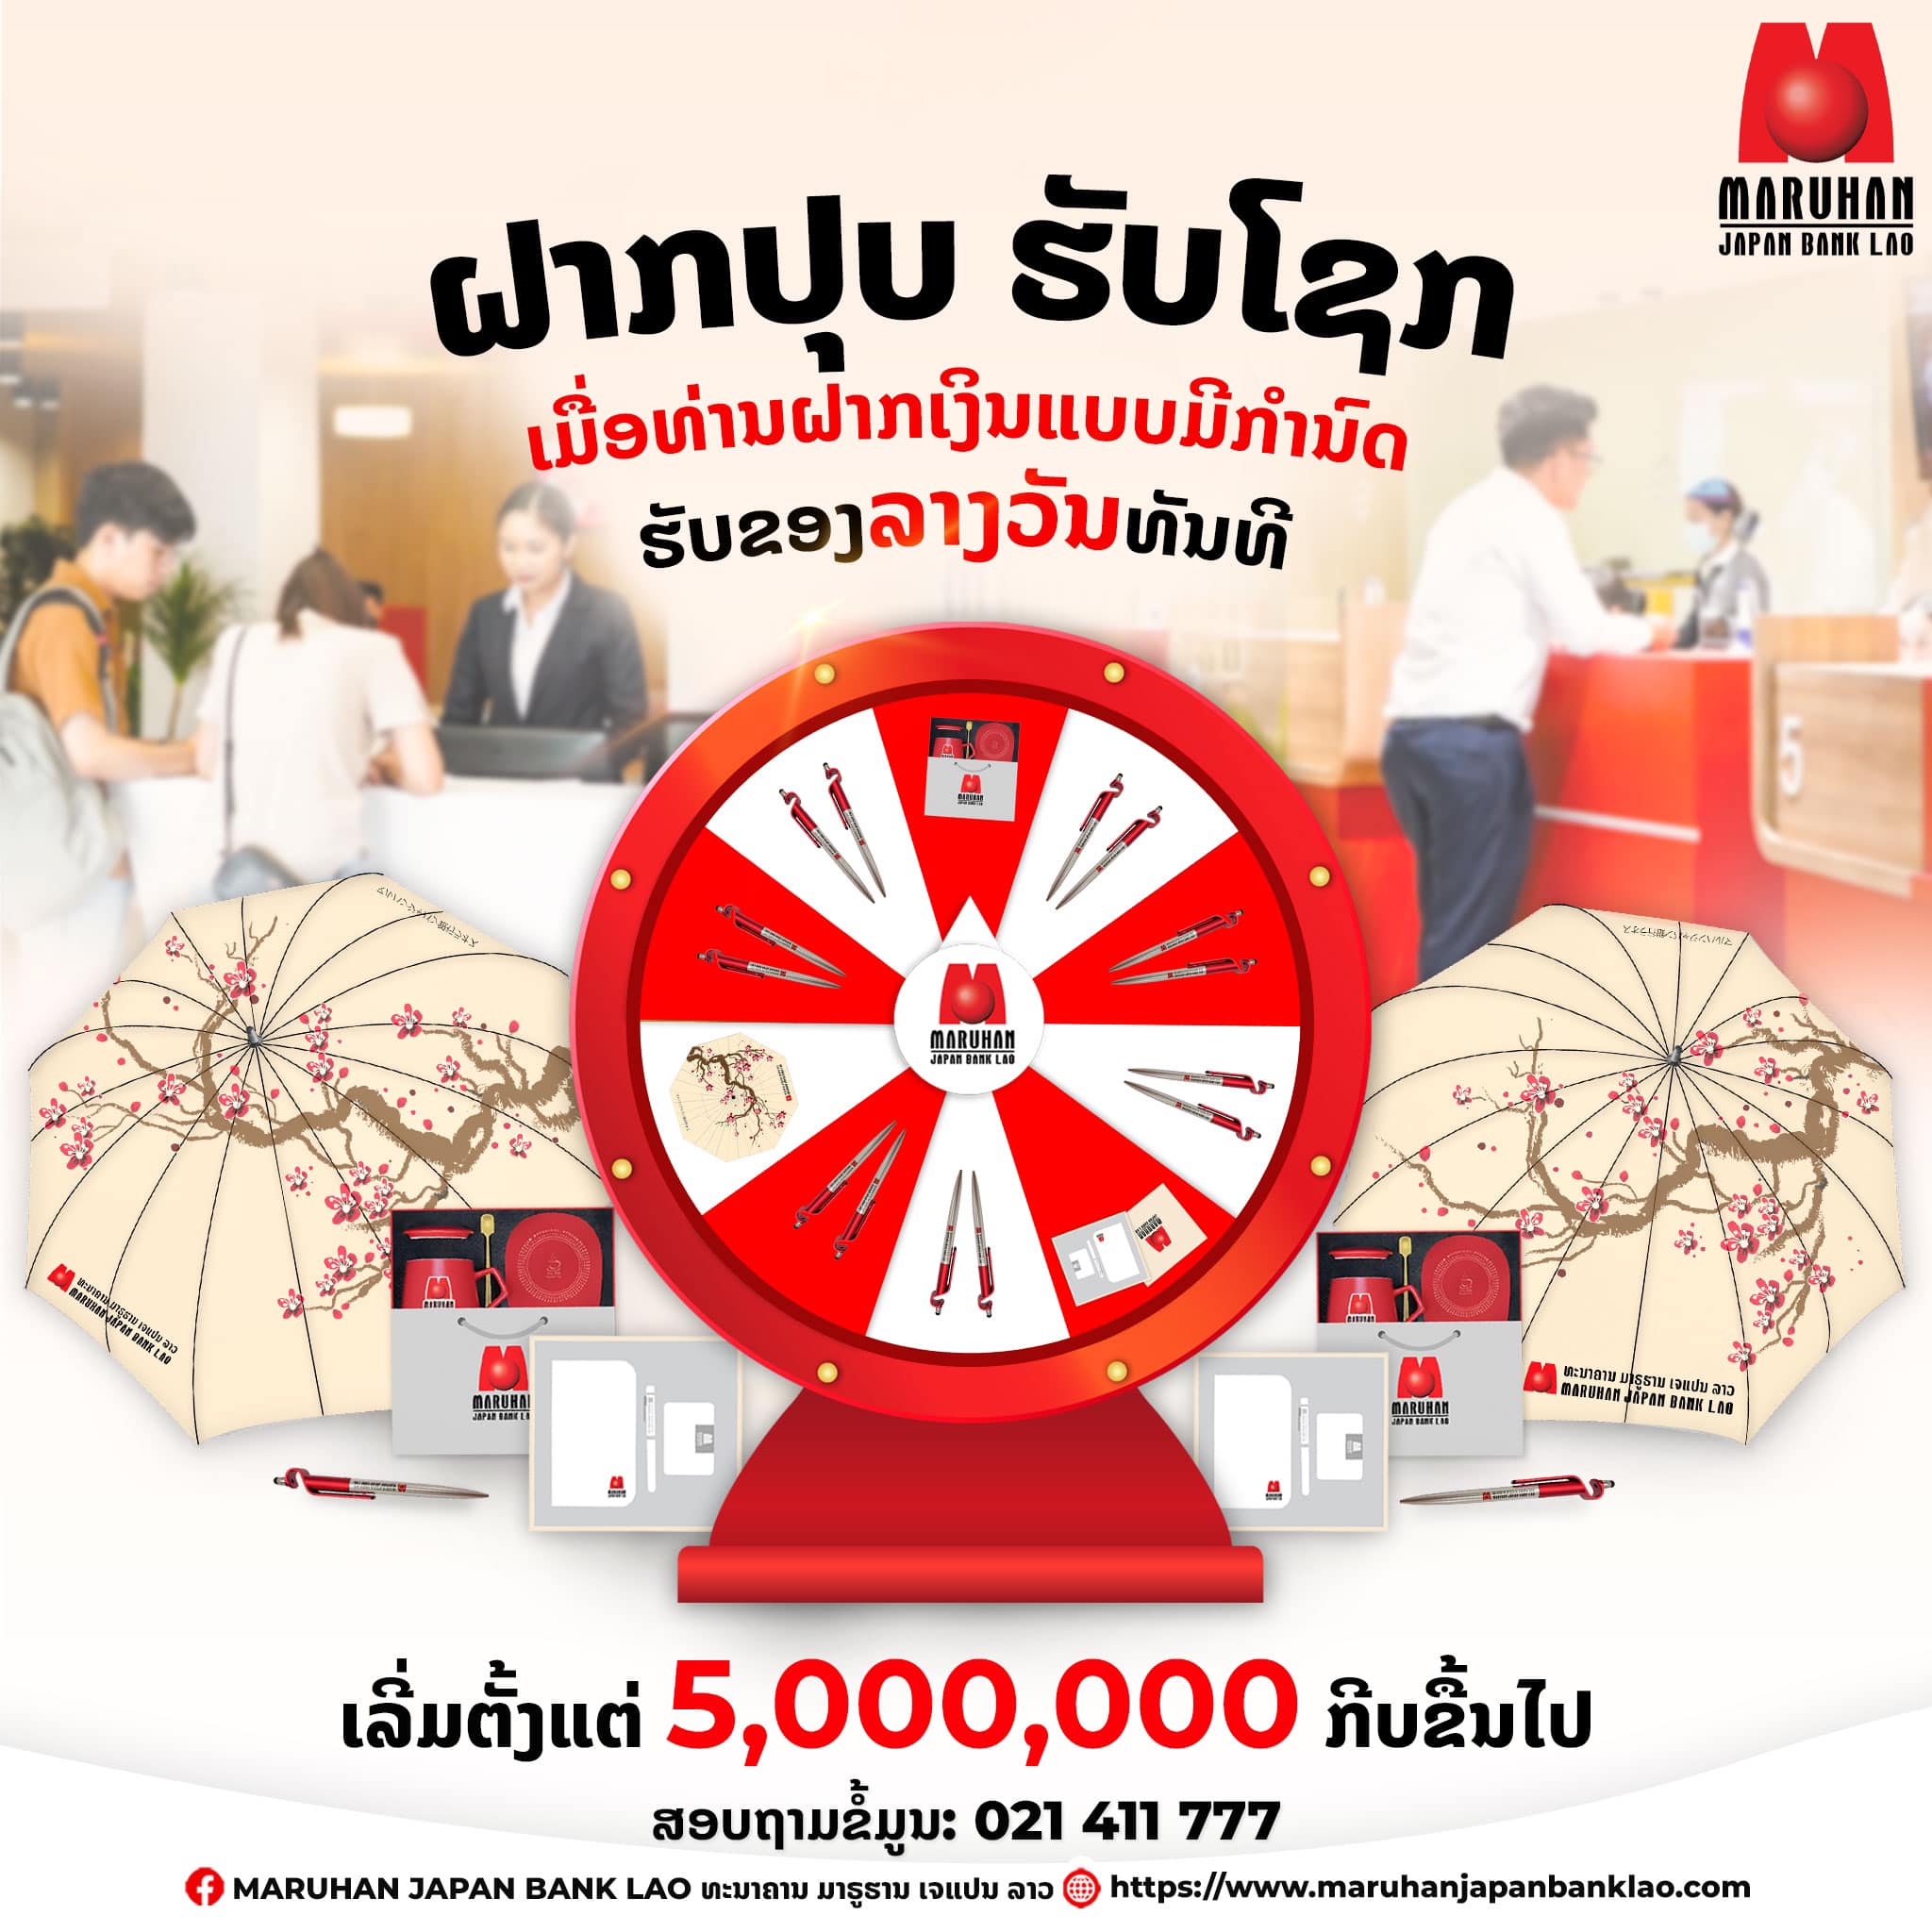 Try your luck this rainy season! Spin the wheel for a chance to win in our lucky draw when you make a fixed deposit of LAK 5,000,000 or more.